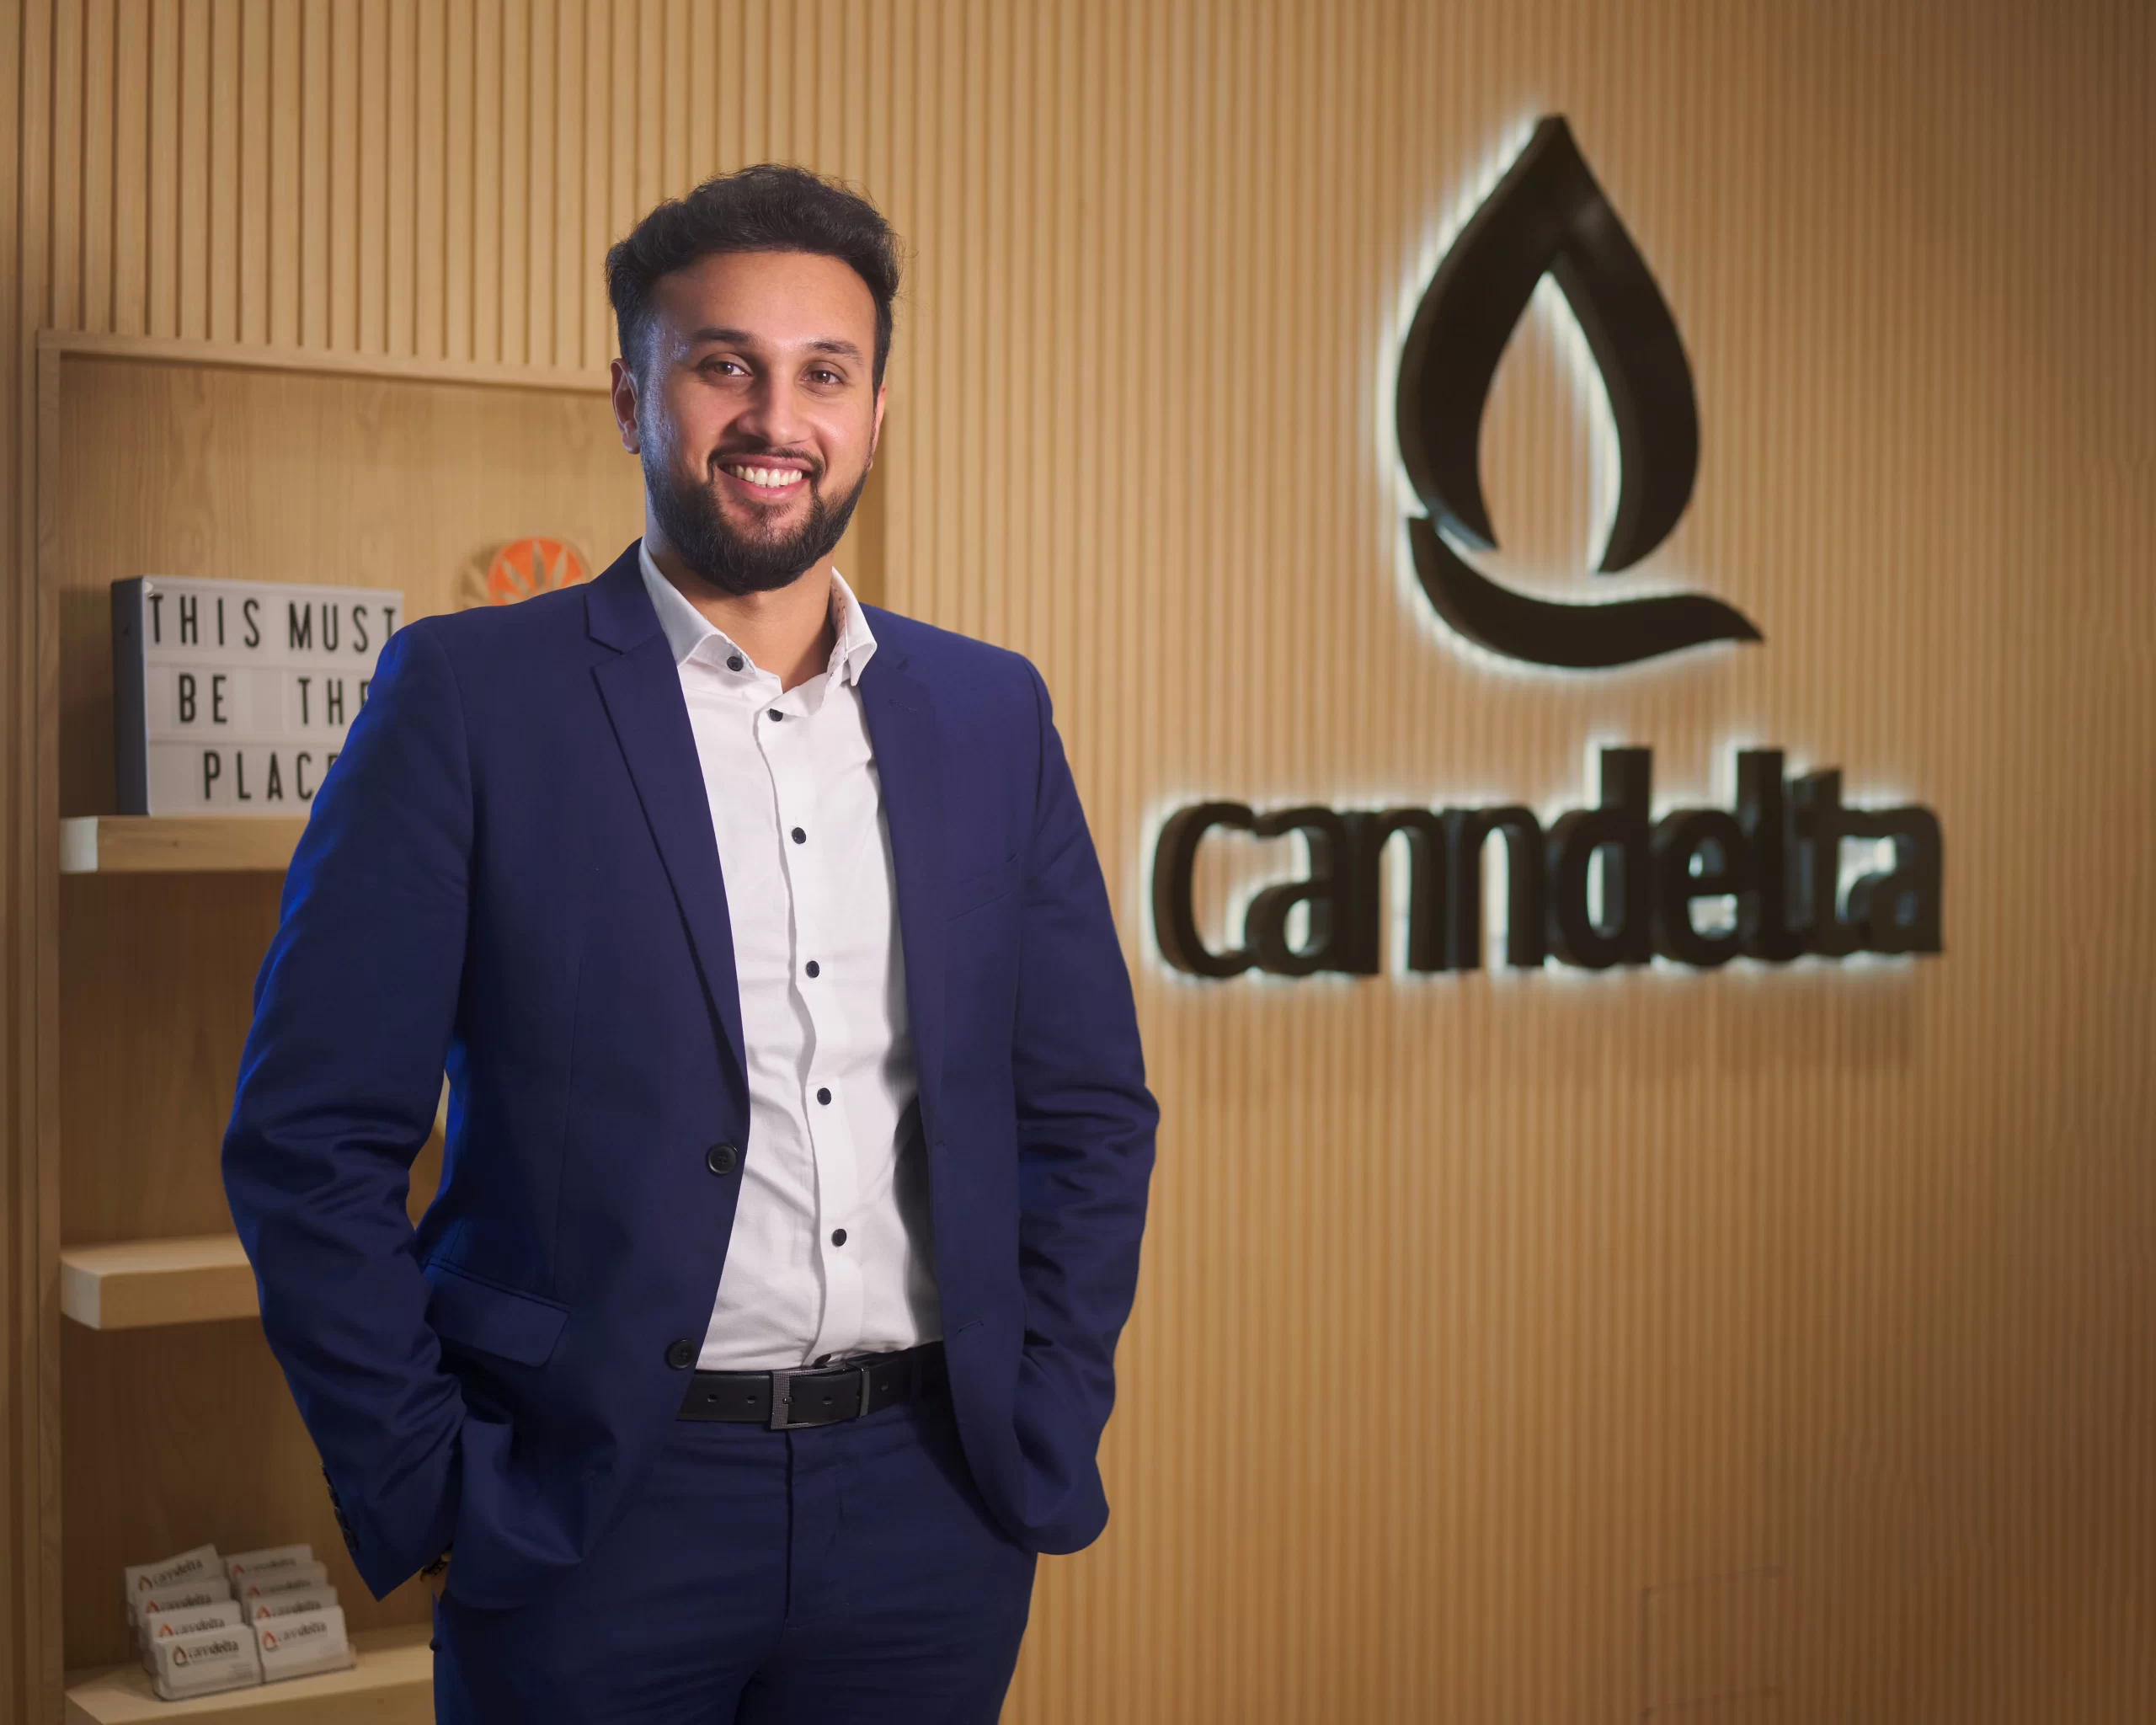 Waleed Khan at the organization with the name CannDelta